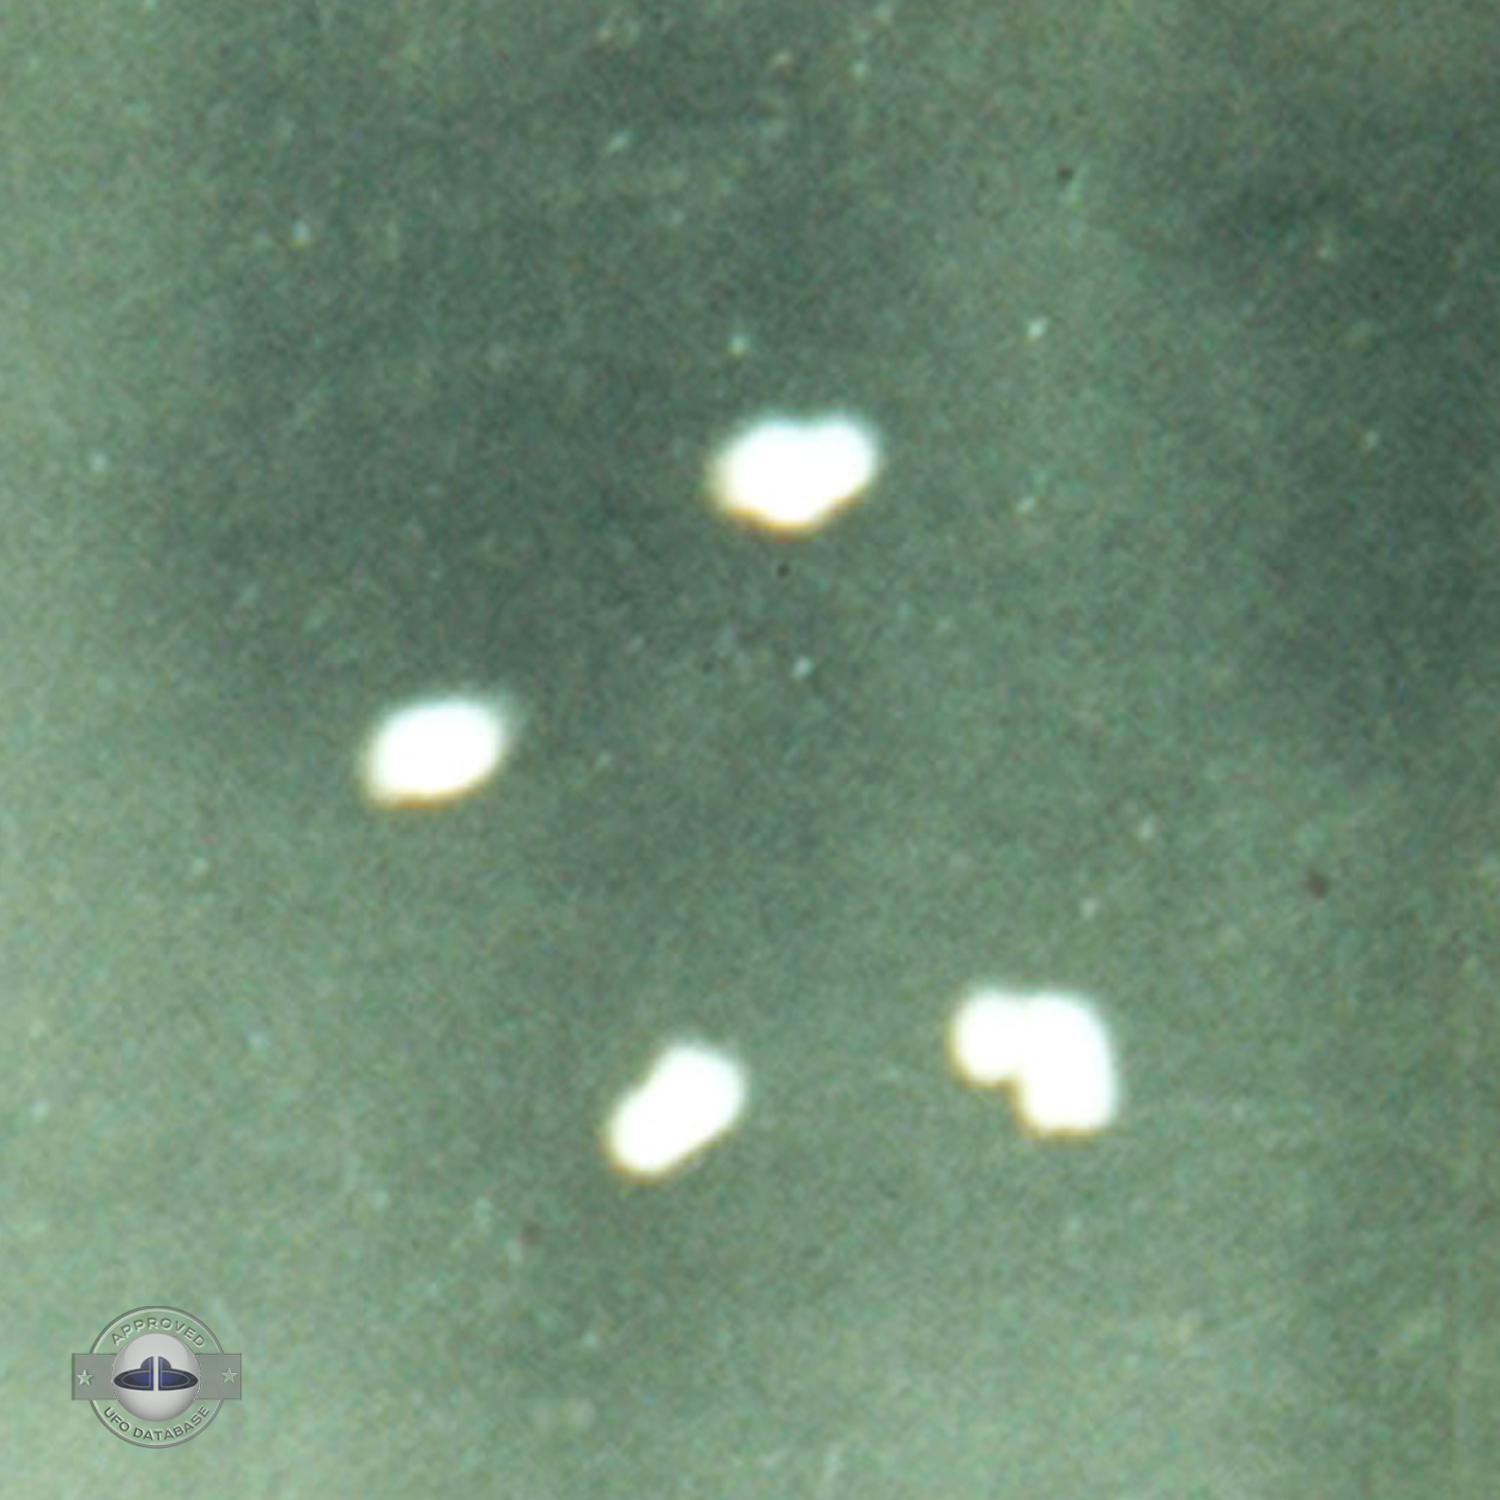 8 UFOs over Ashoka Ashram in Mehrauli India | 1964 | by Billy Meier UFO Picture #177-5